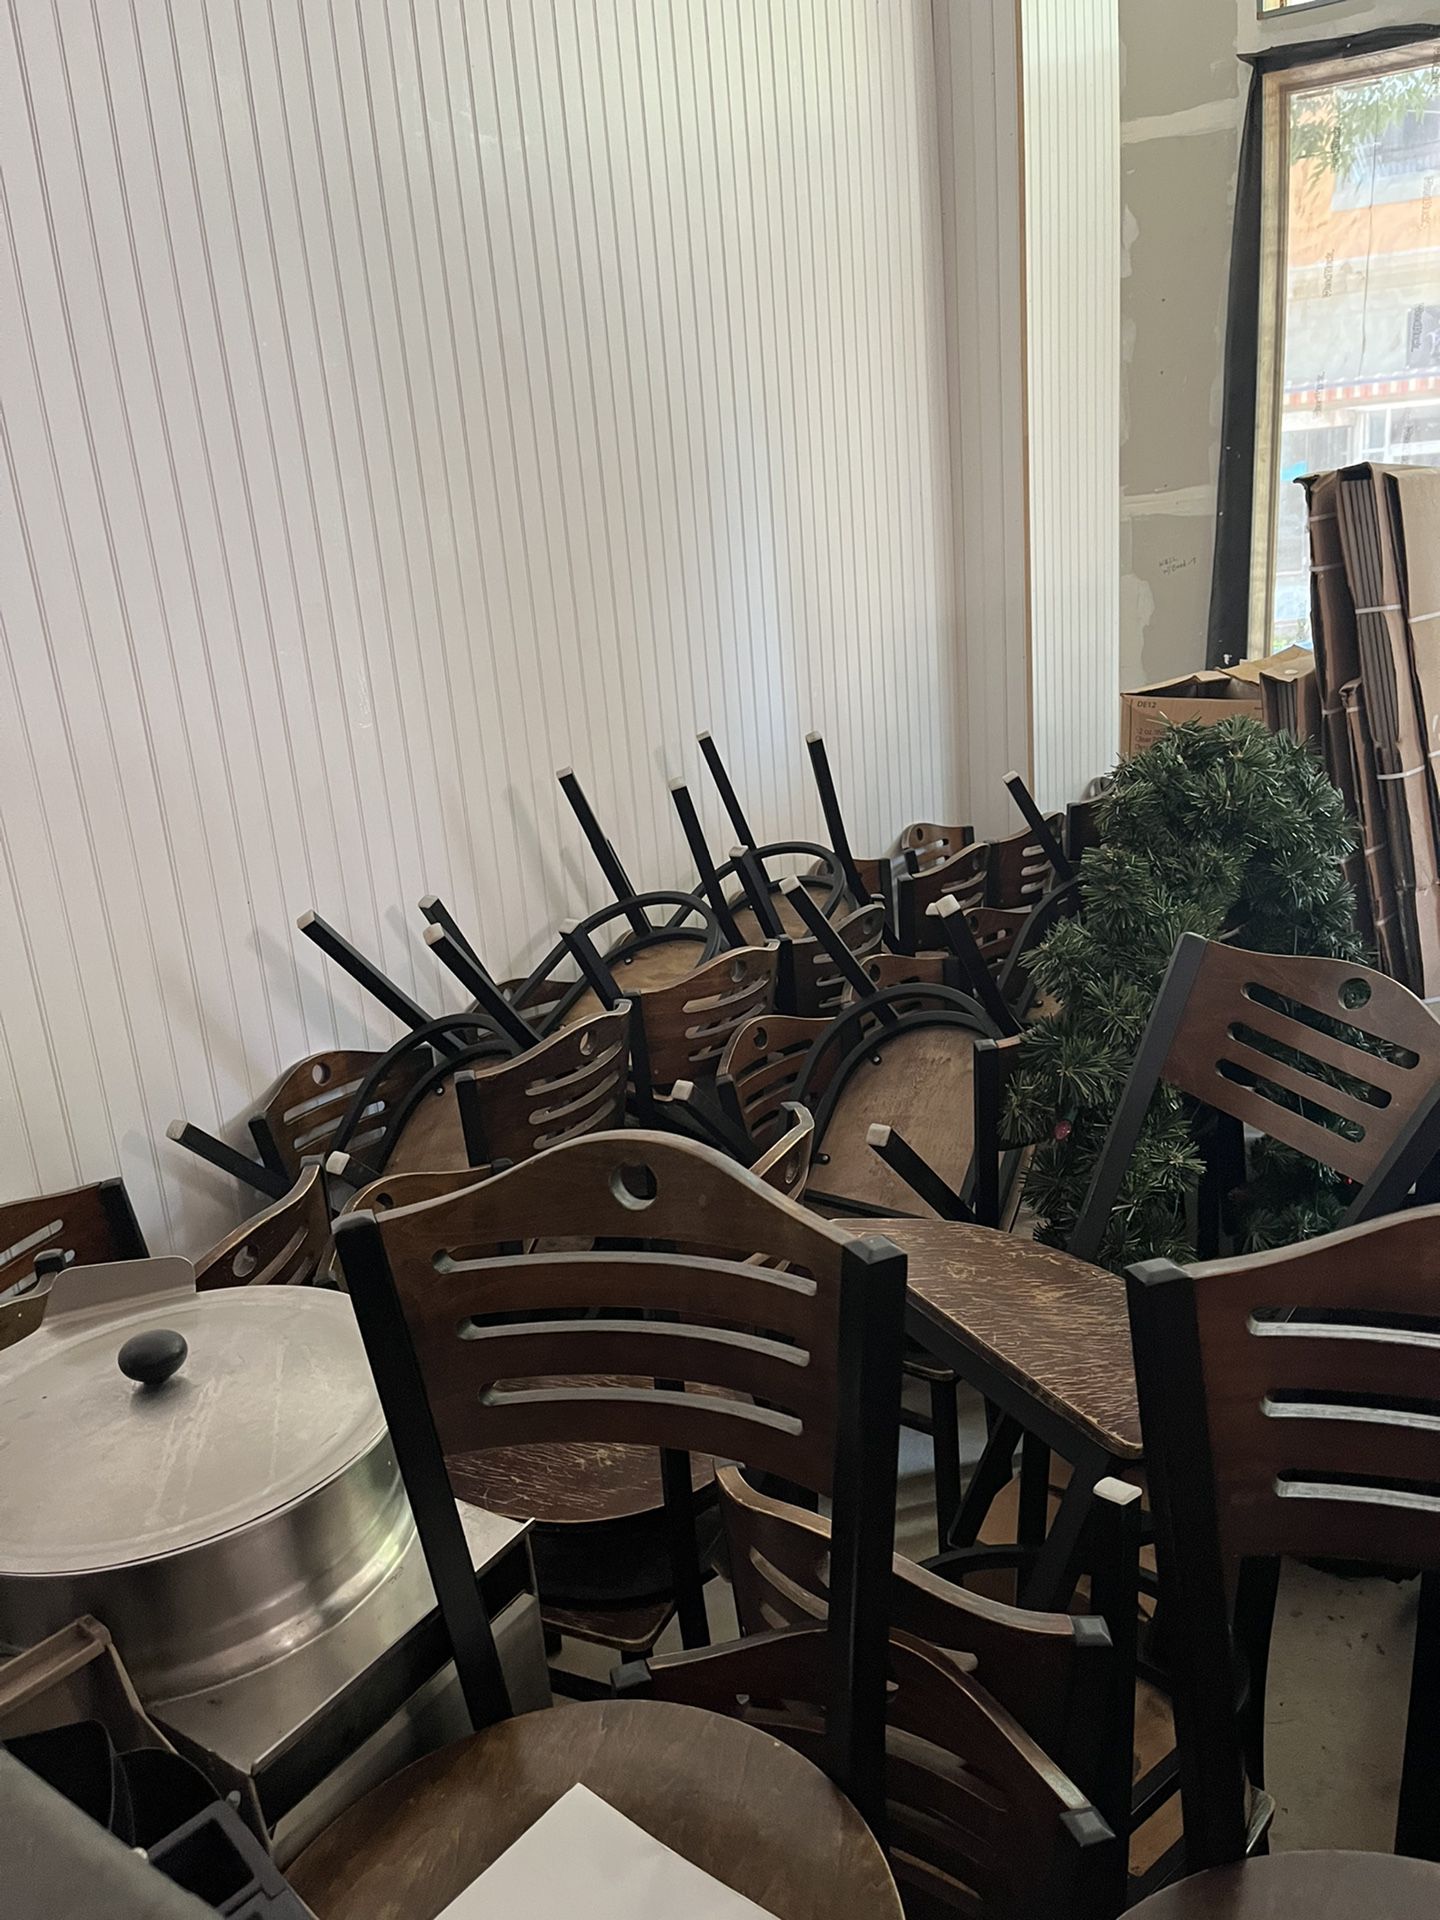 Restaurant Style Chairs 